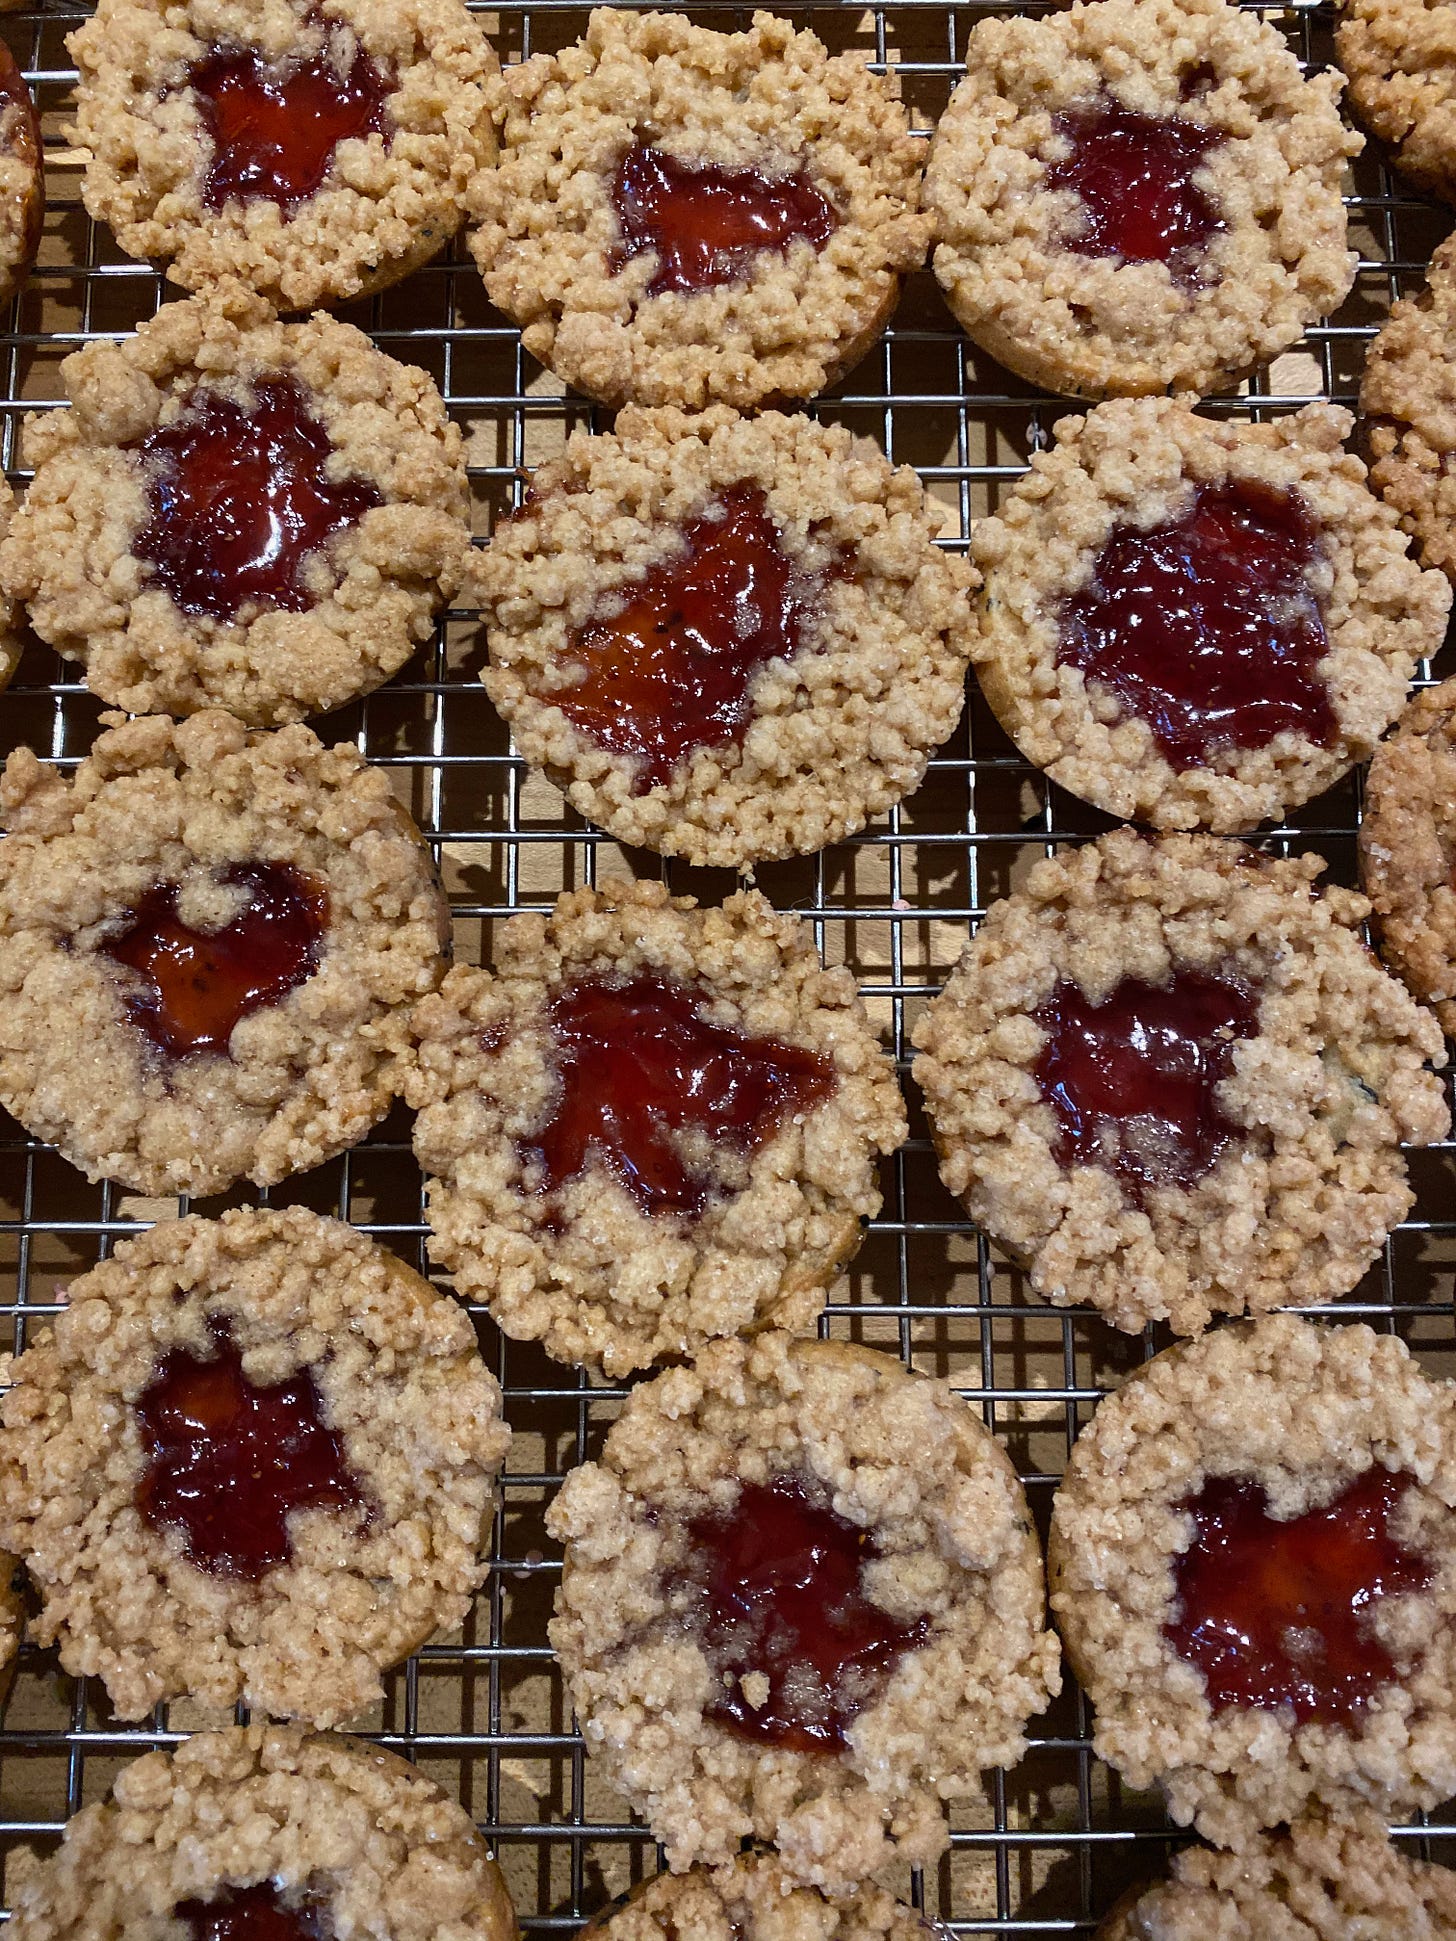 Three rows of round cookies on a metal cooking rack. The cookies have a crumbly streusel topping, and the centers are filled with raspberry jam, which is glistening and bubbly from being in the oven.